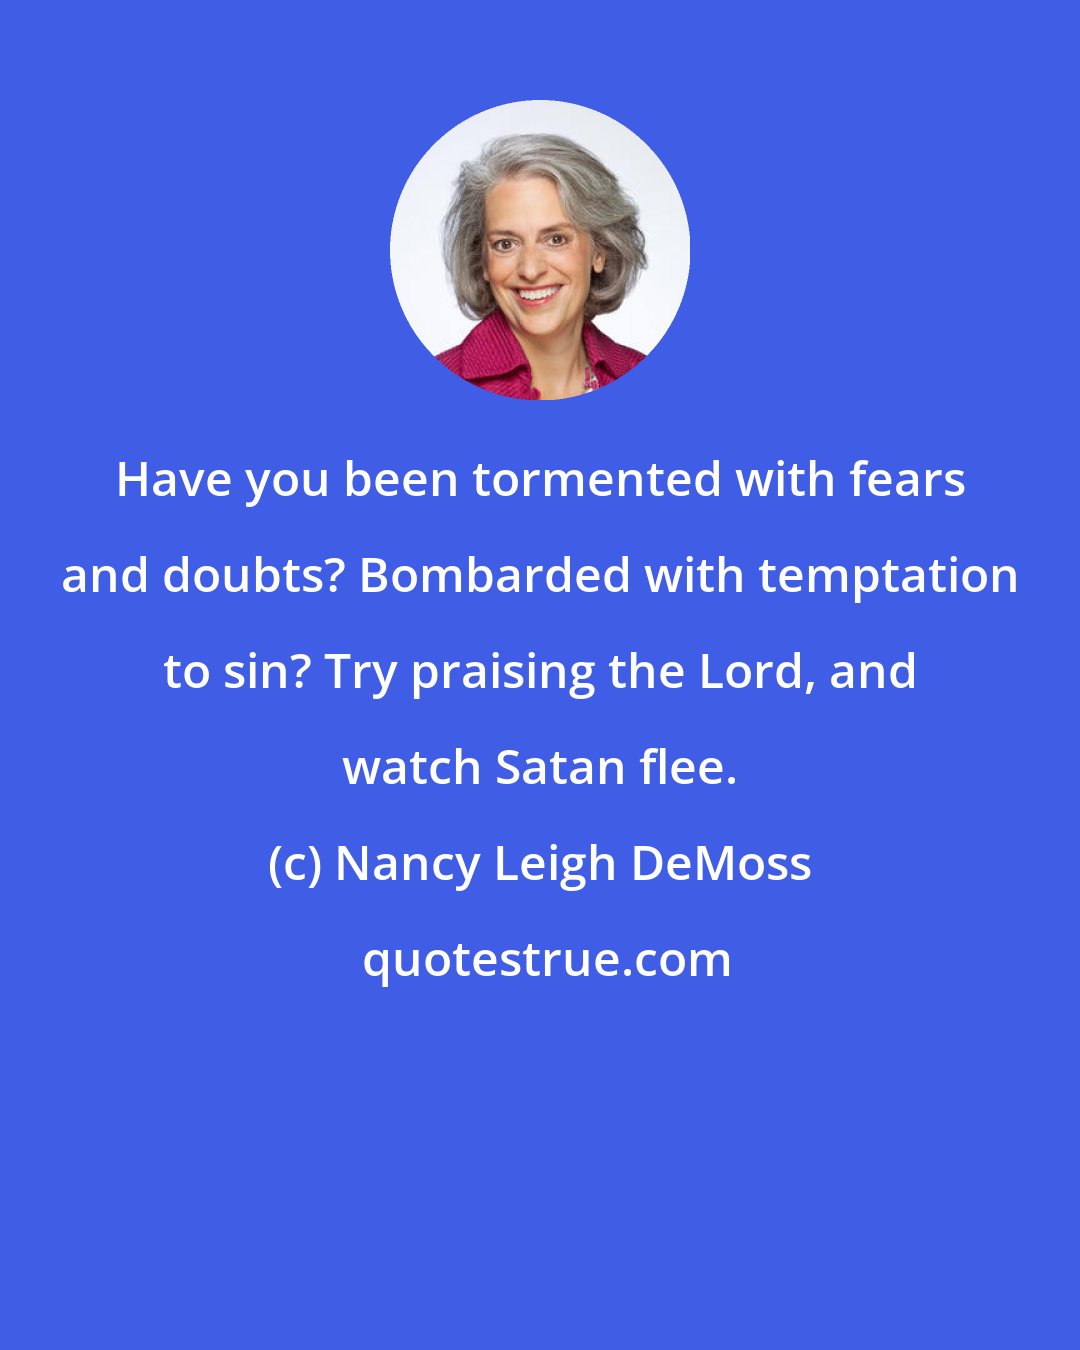 Nancy Leigh DeMoss: Have you been tormented with fears and doubts? Bombarded with temptation to sin? Try praising the Lord, and watch Satan flee.